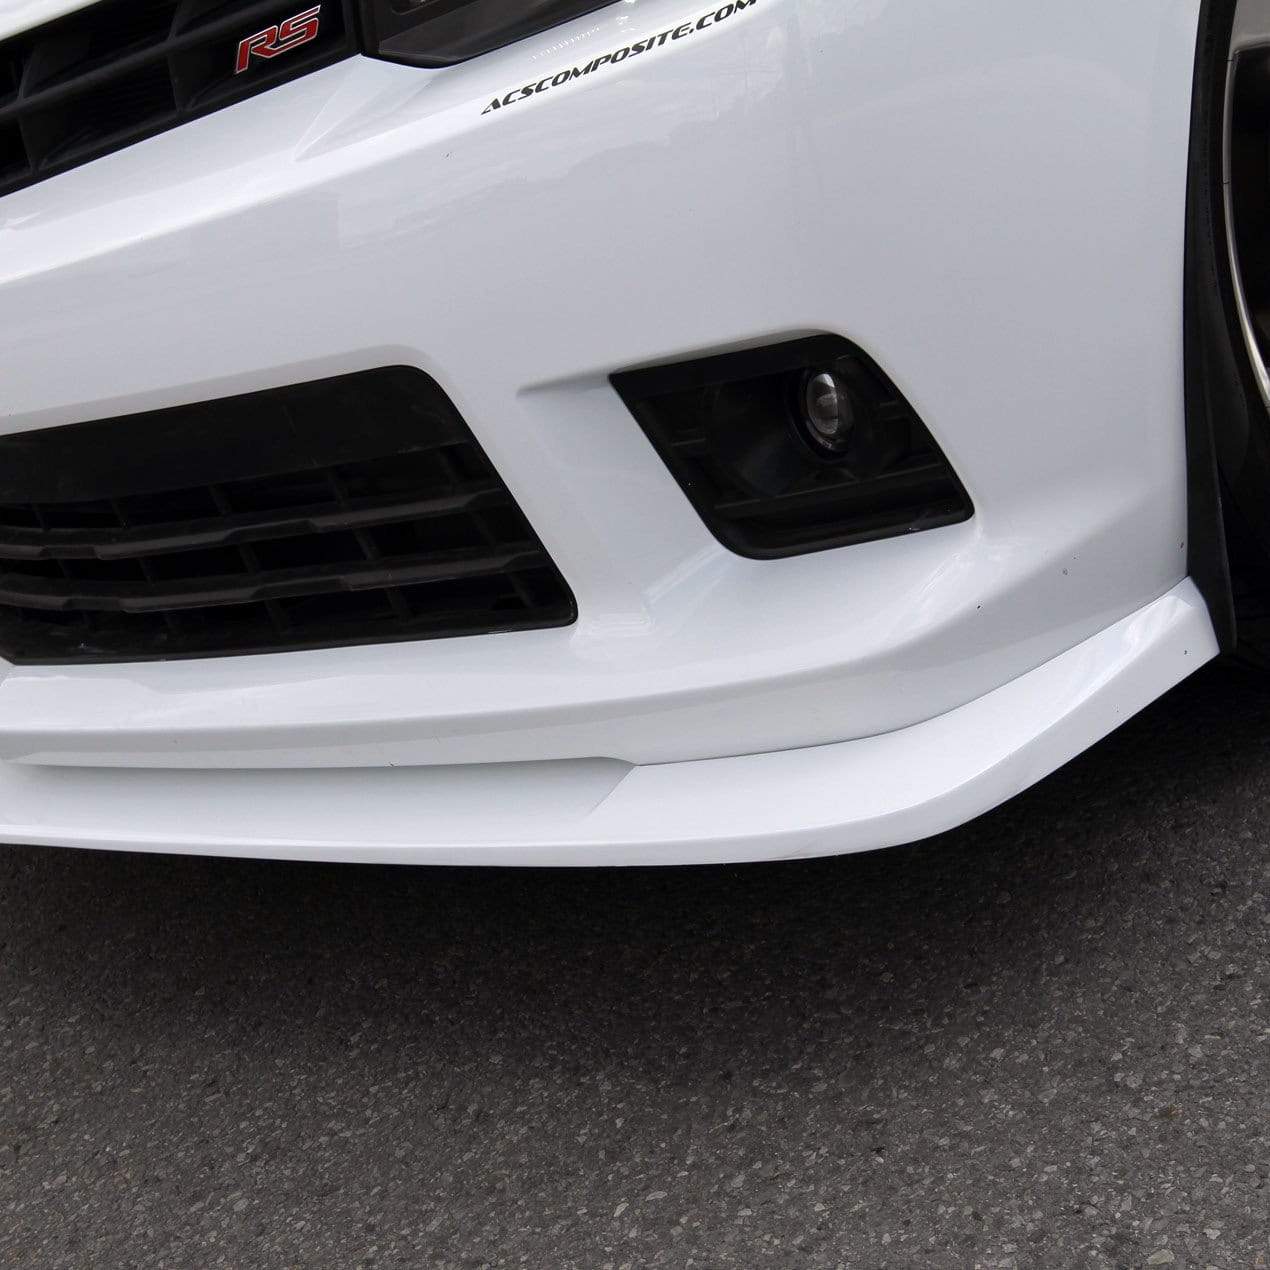 ACS-T4 Splitter for Camaro 2014-2015 SS in Satin Black (SKU: 46-4-001) enhances airflow and style without affecting ride height.